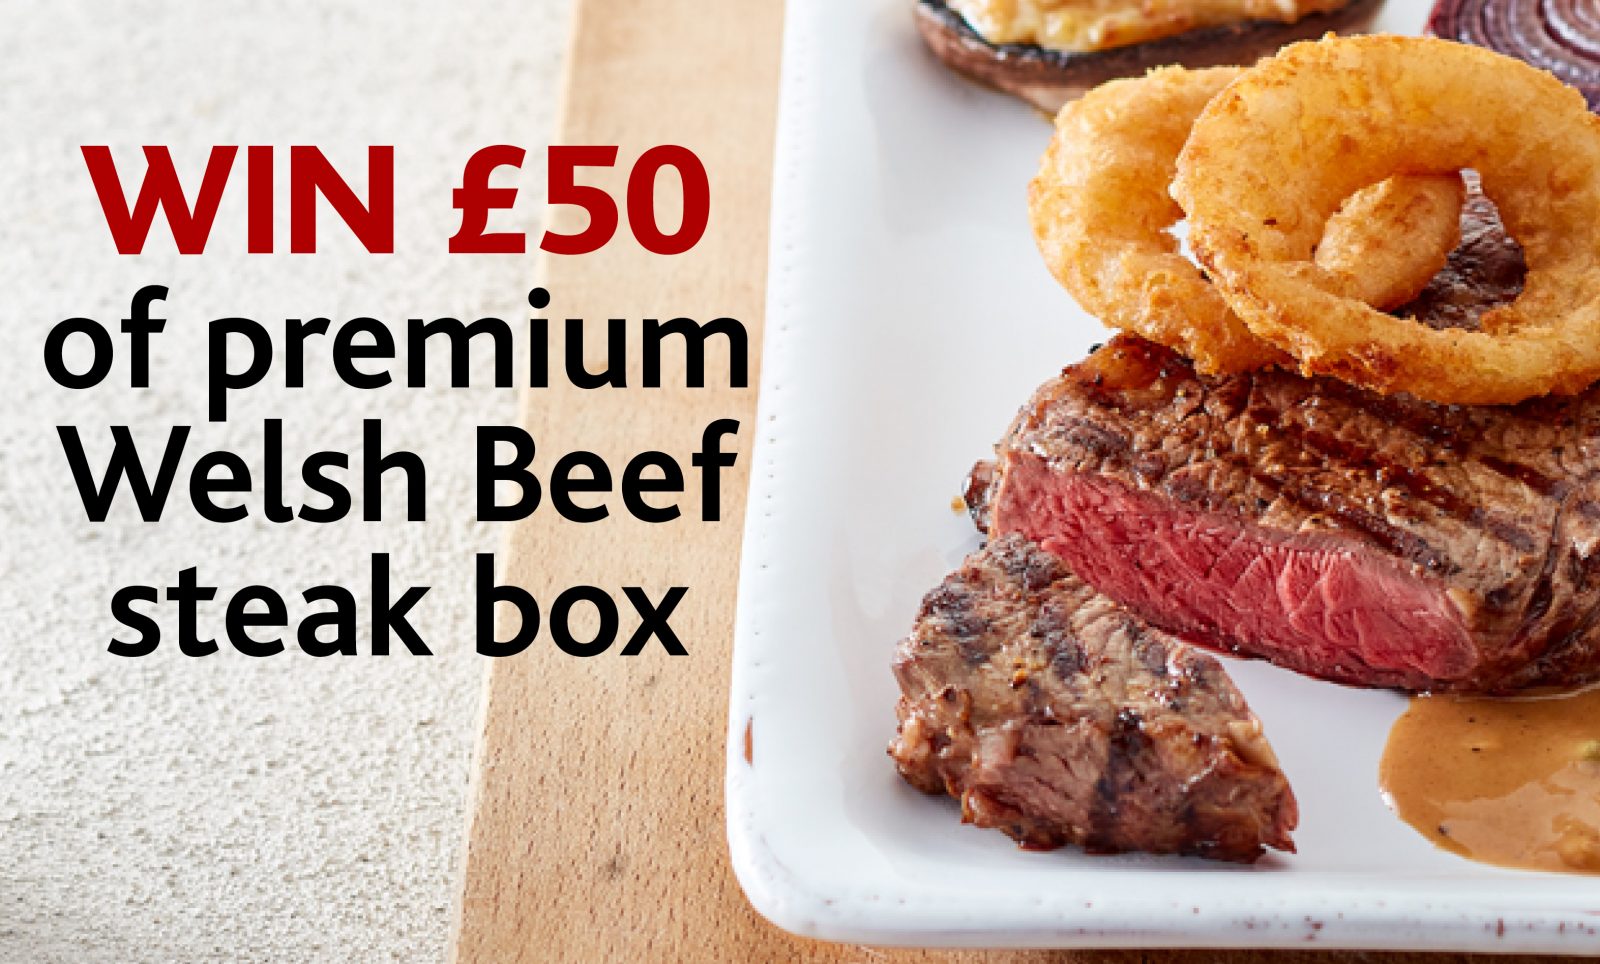 Have you got your Welsh Beef rib-eye on some treats this autumn?